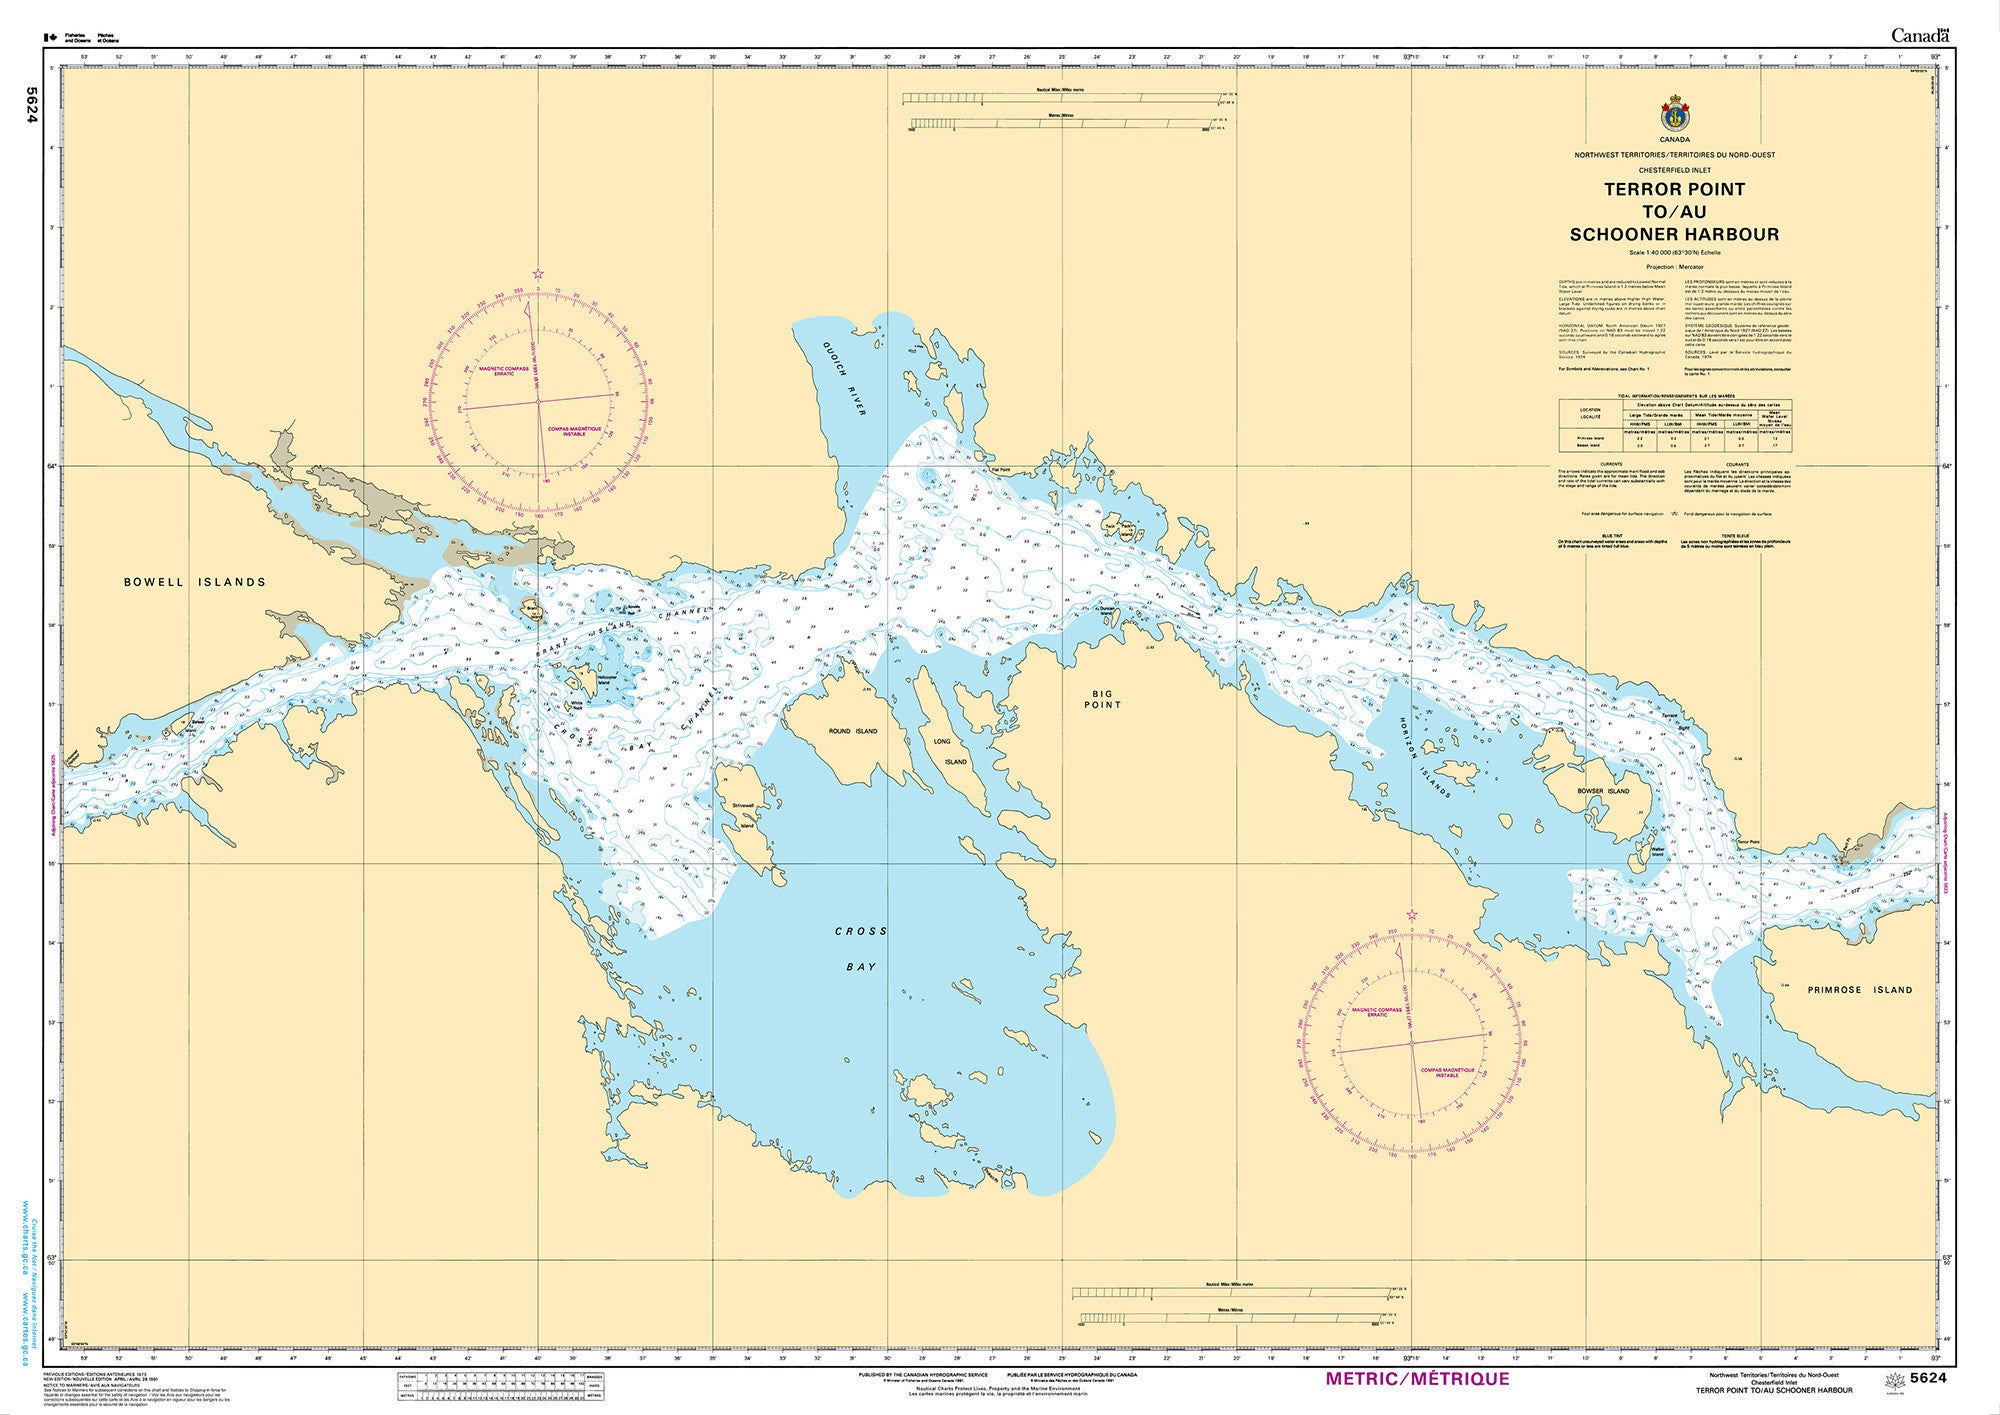 Canadian Hydrographic Service Nautical Chart CHS5624: Terror Point to/au Schooner Harbour